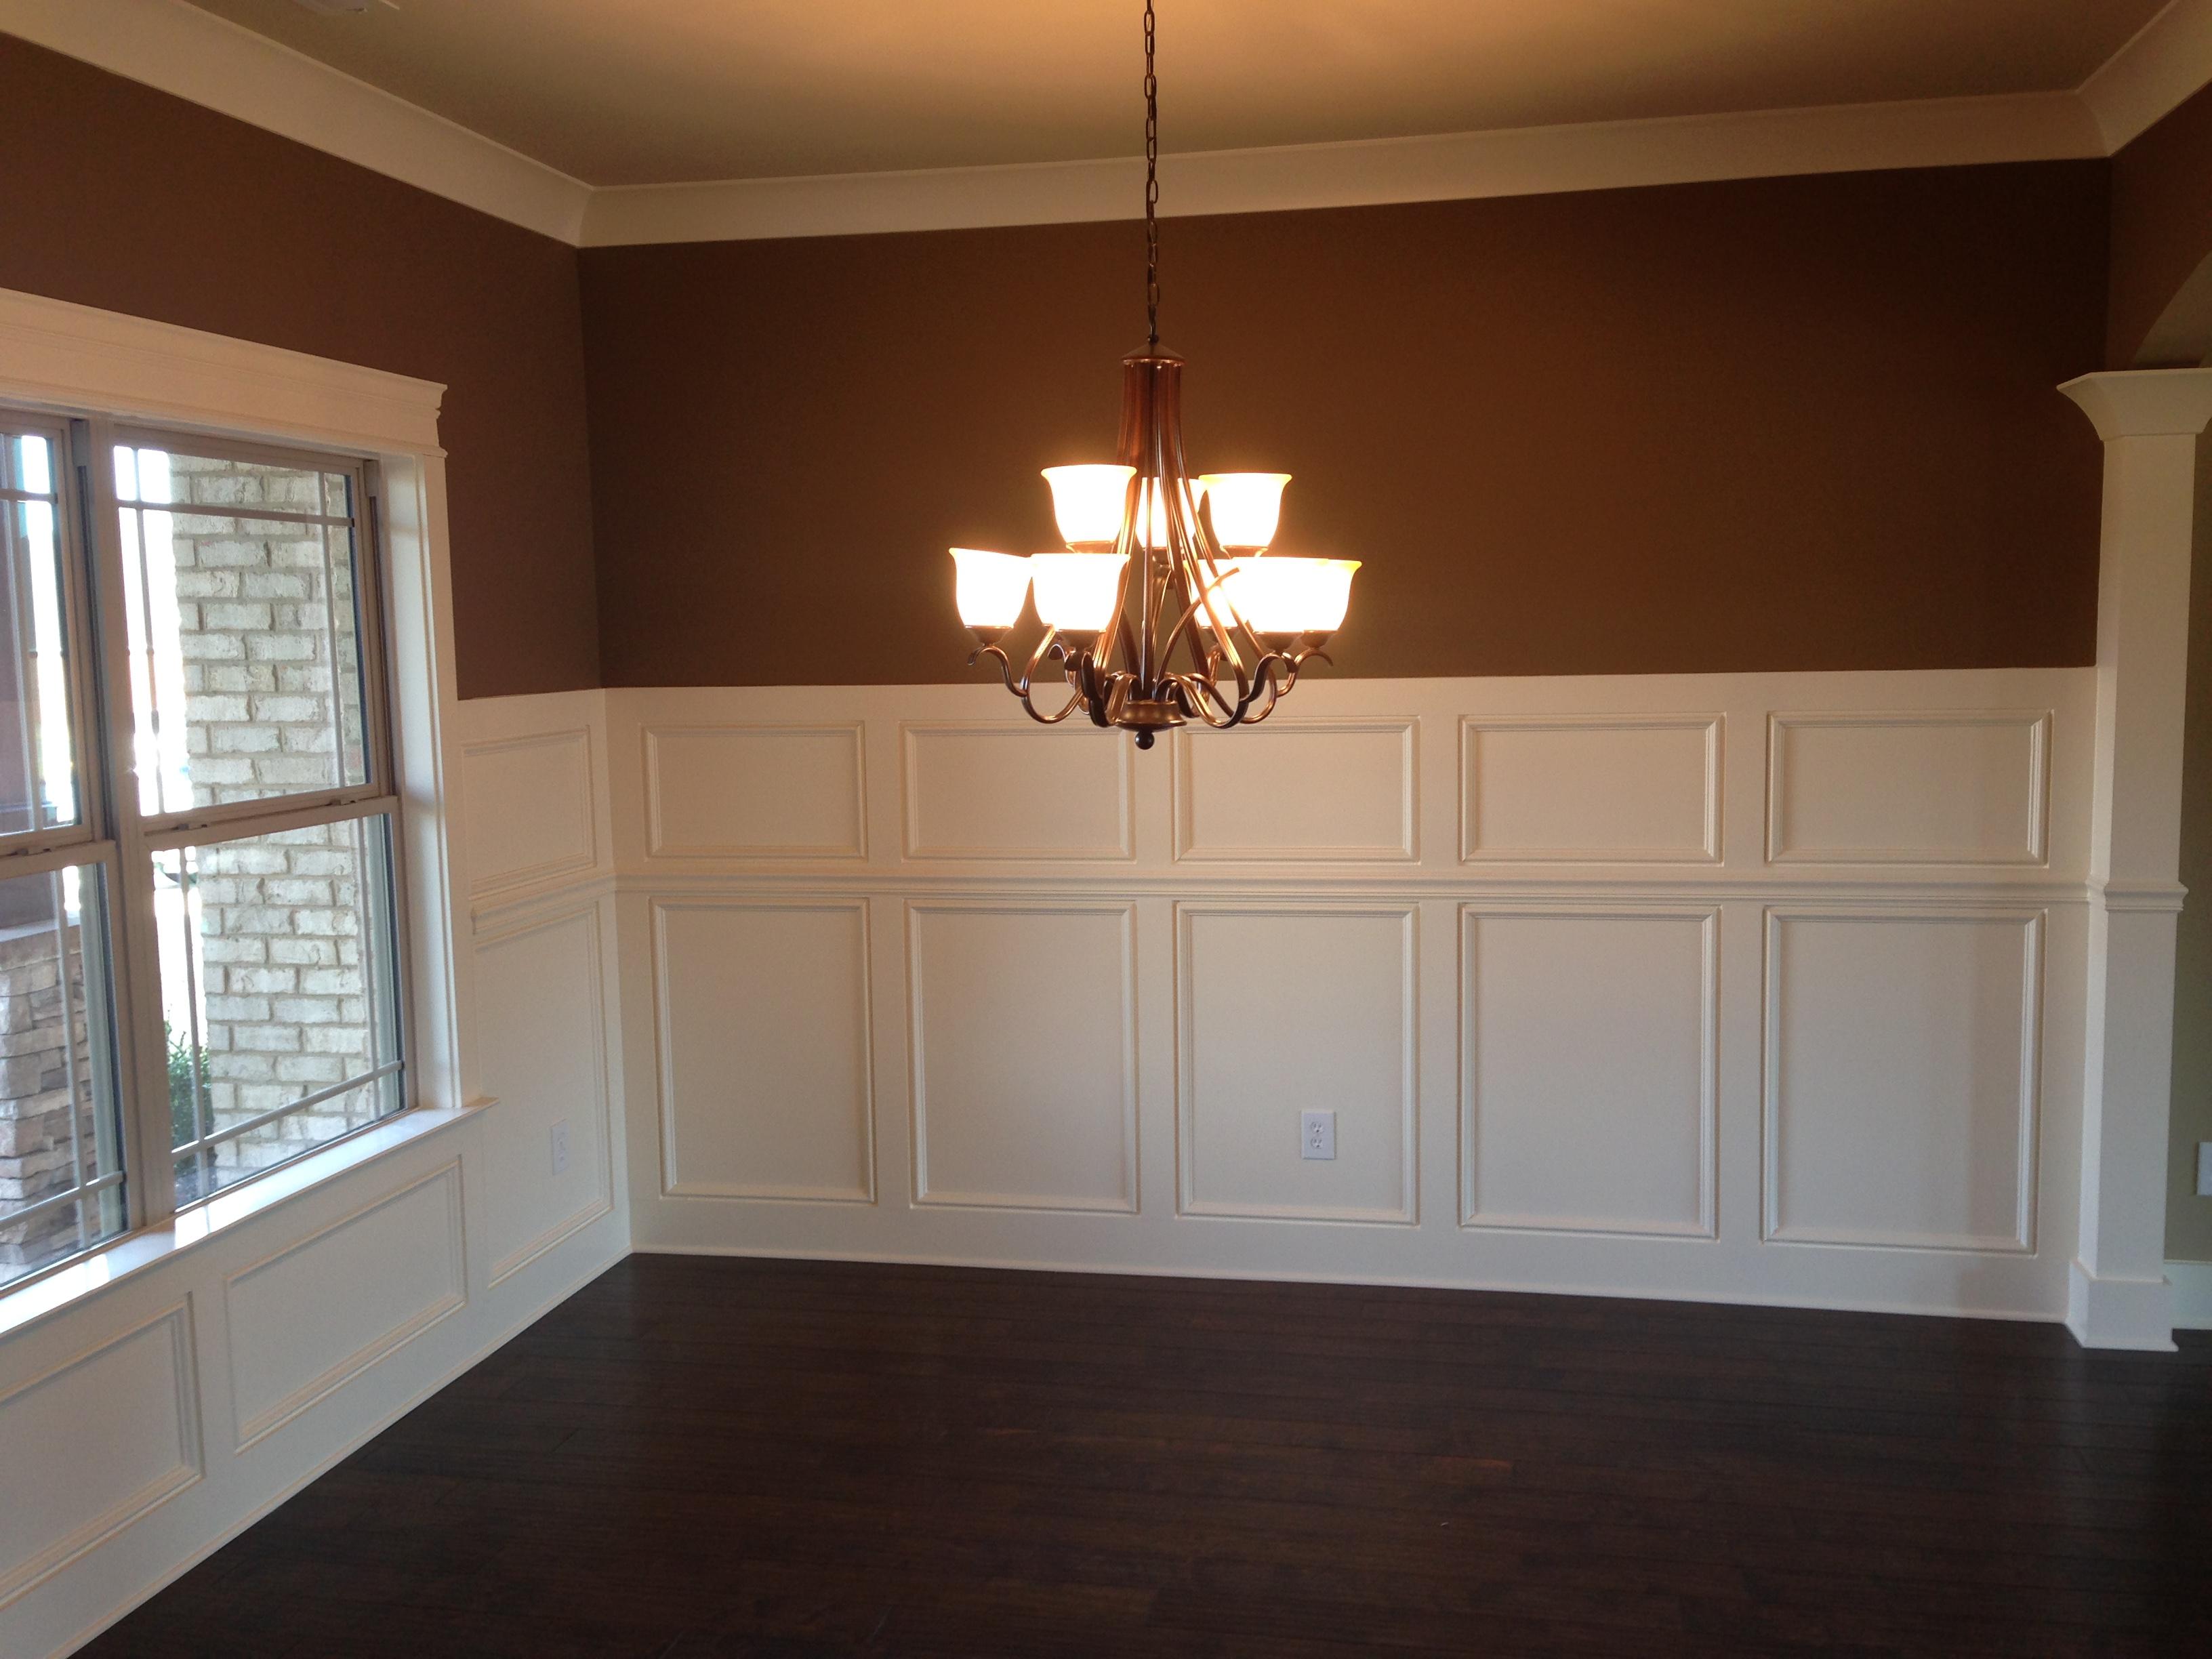 Wainscoting in a dining room adds that extra special touch.